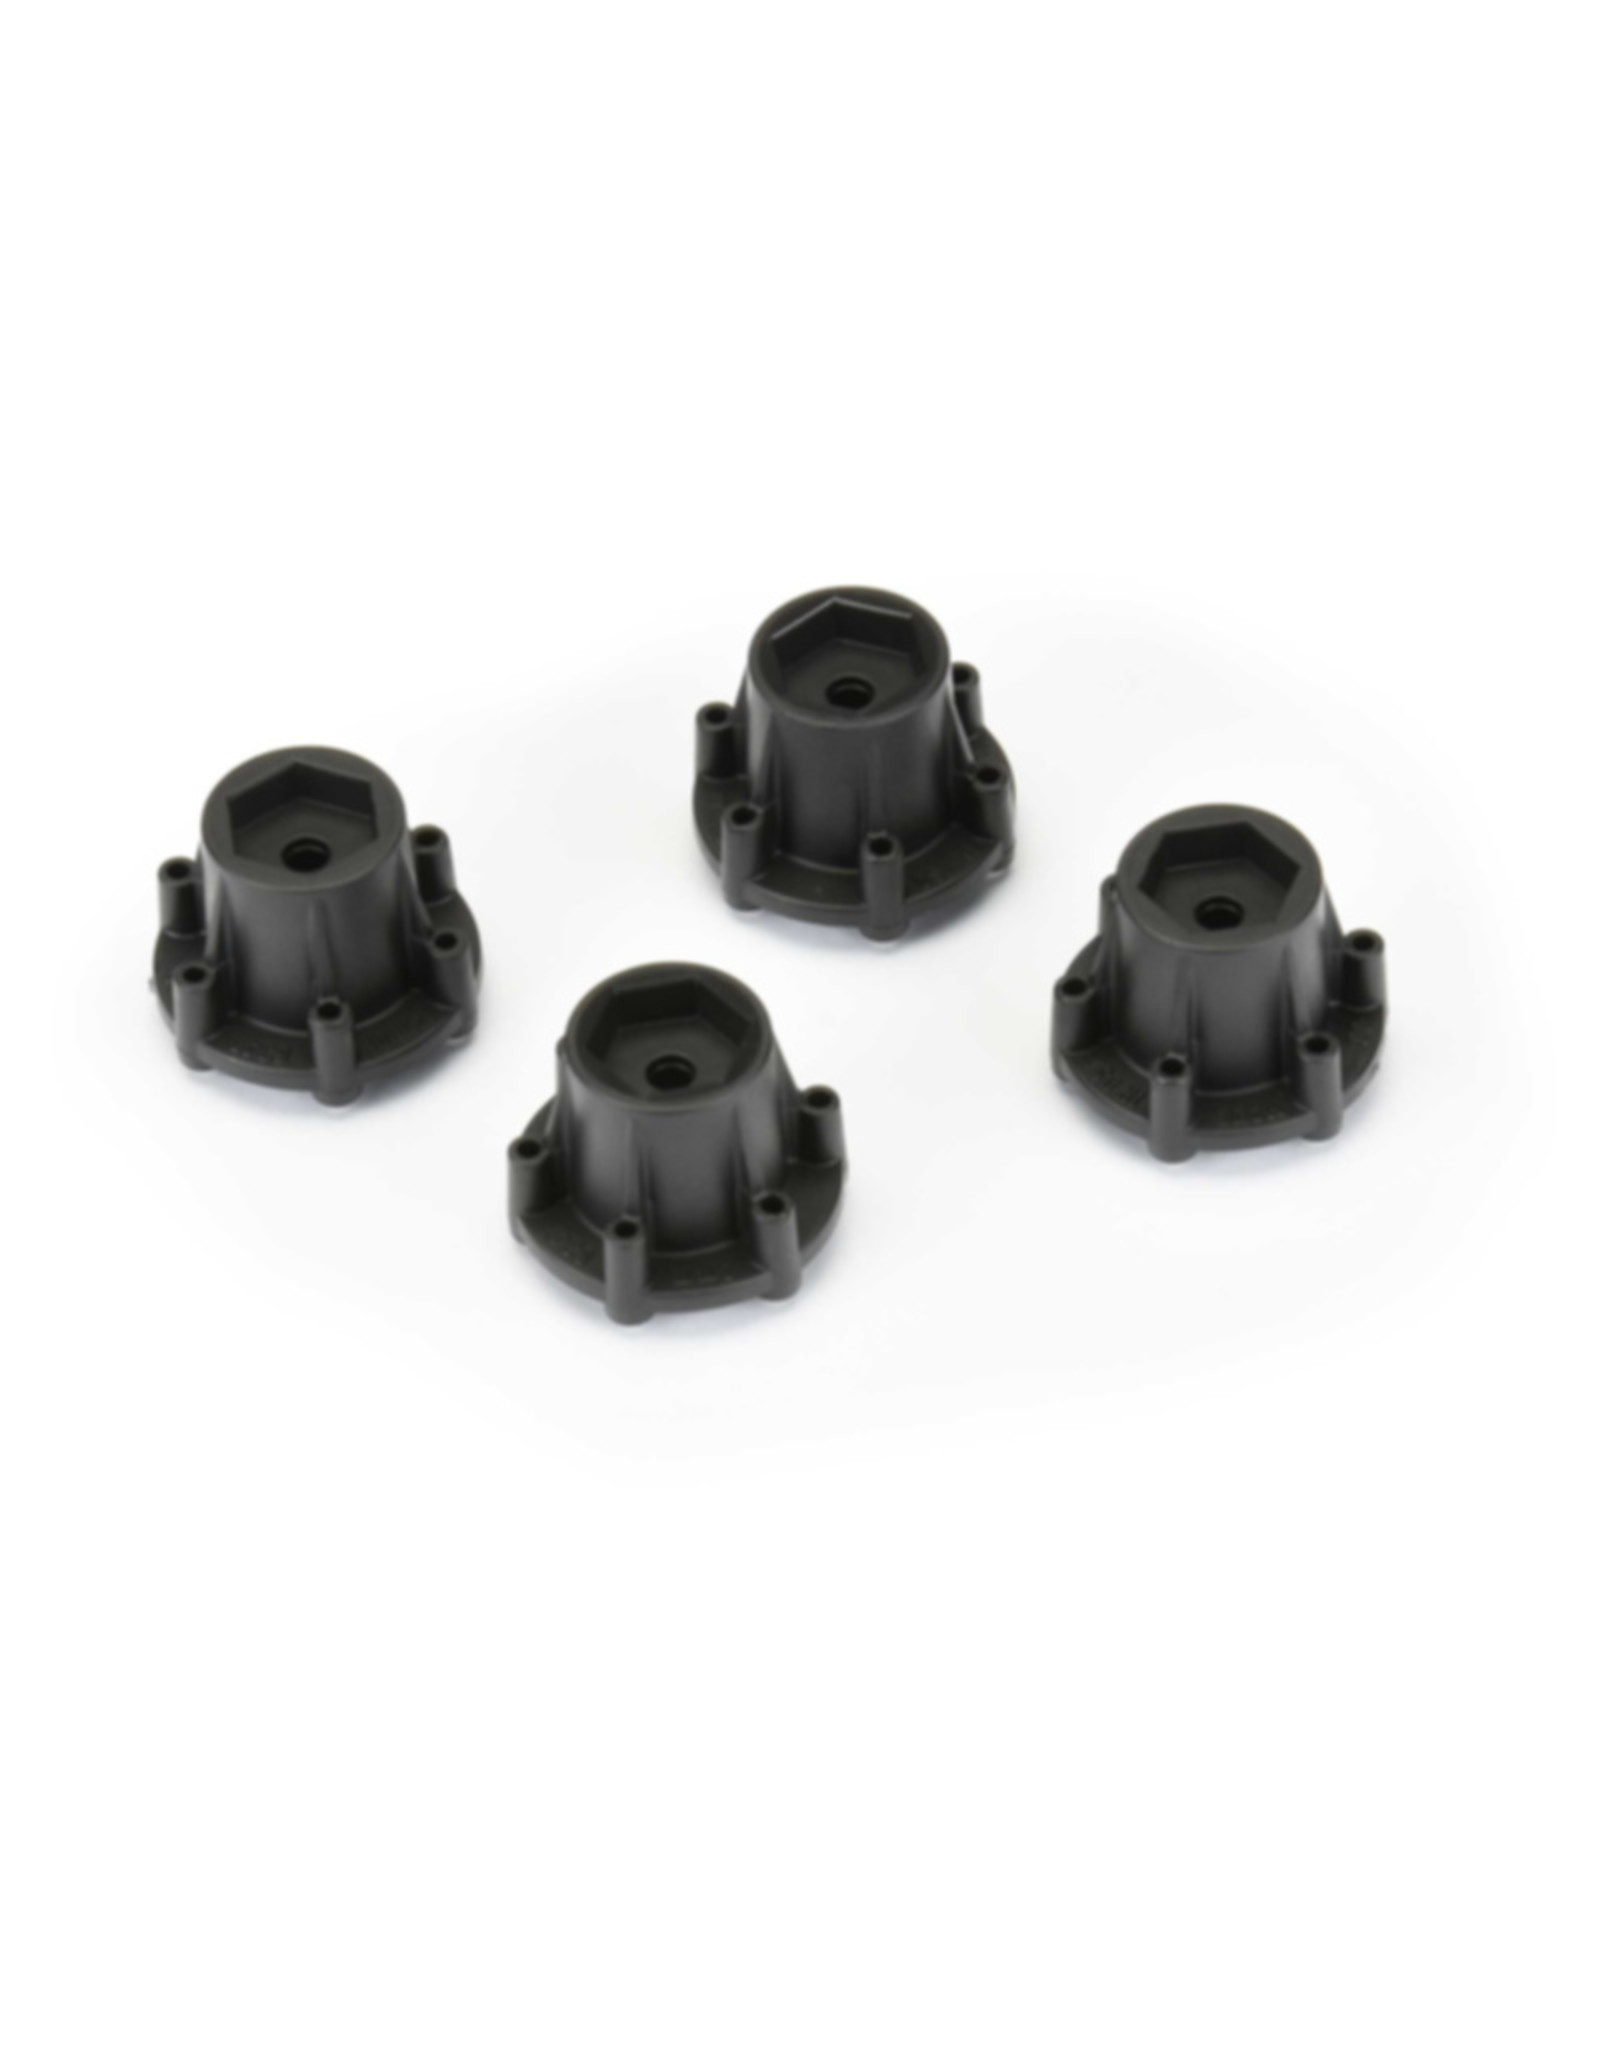 Pro-Line Racing PRO634700 6x30 to 14mm Hex Adapters for 6x30 2.8" Wheels